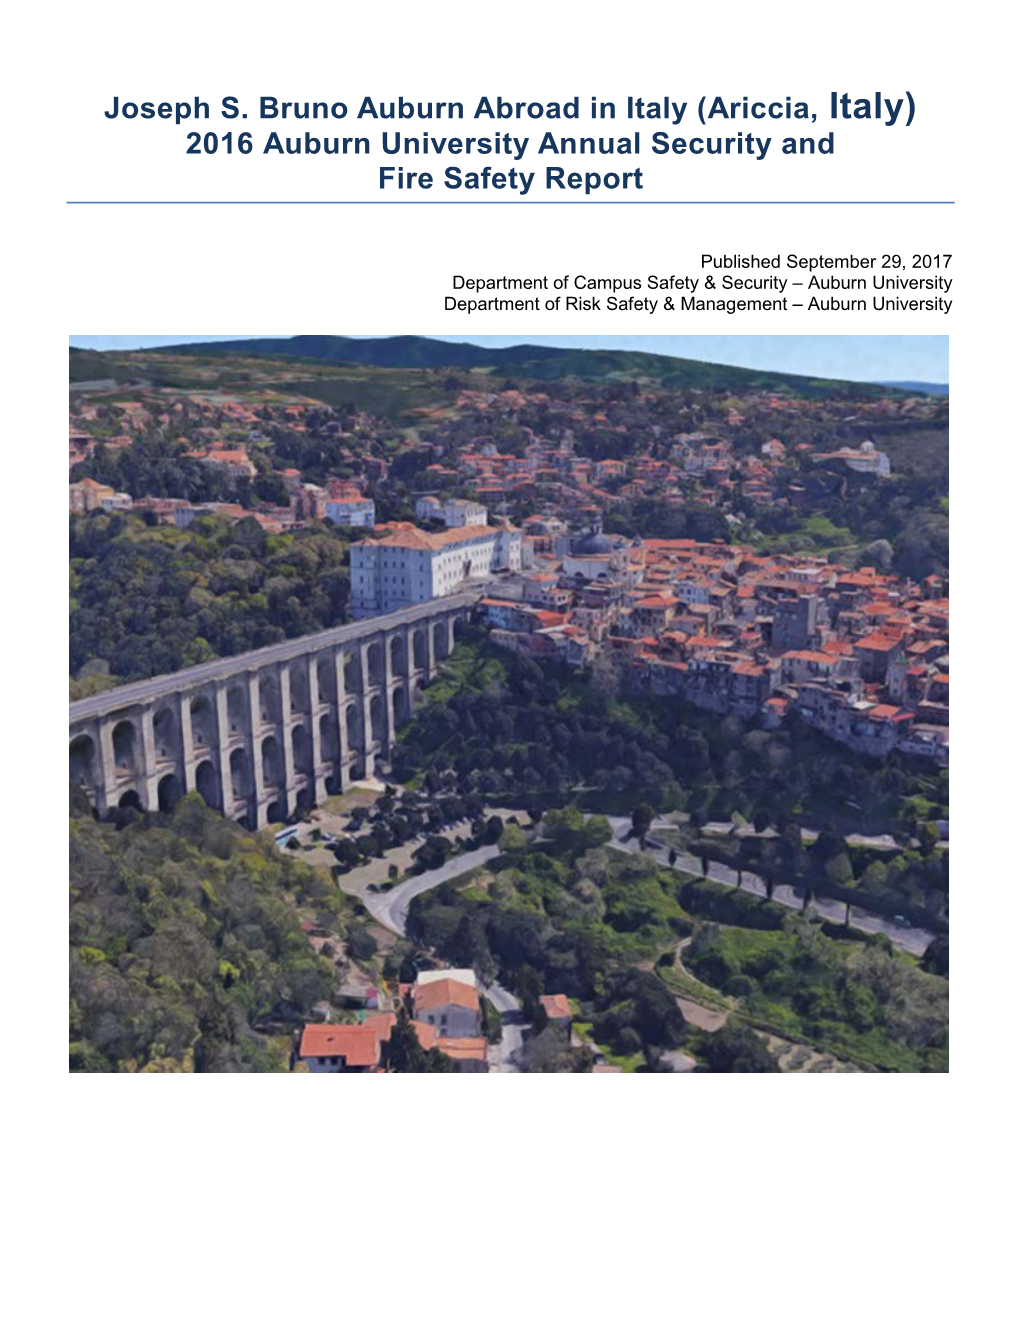 Joseph S. Bruno Auburn Abroad in Italy (Ariccia, Italy) 2016 Auburn University Annual Security and Fire Safety Report